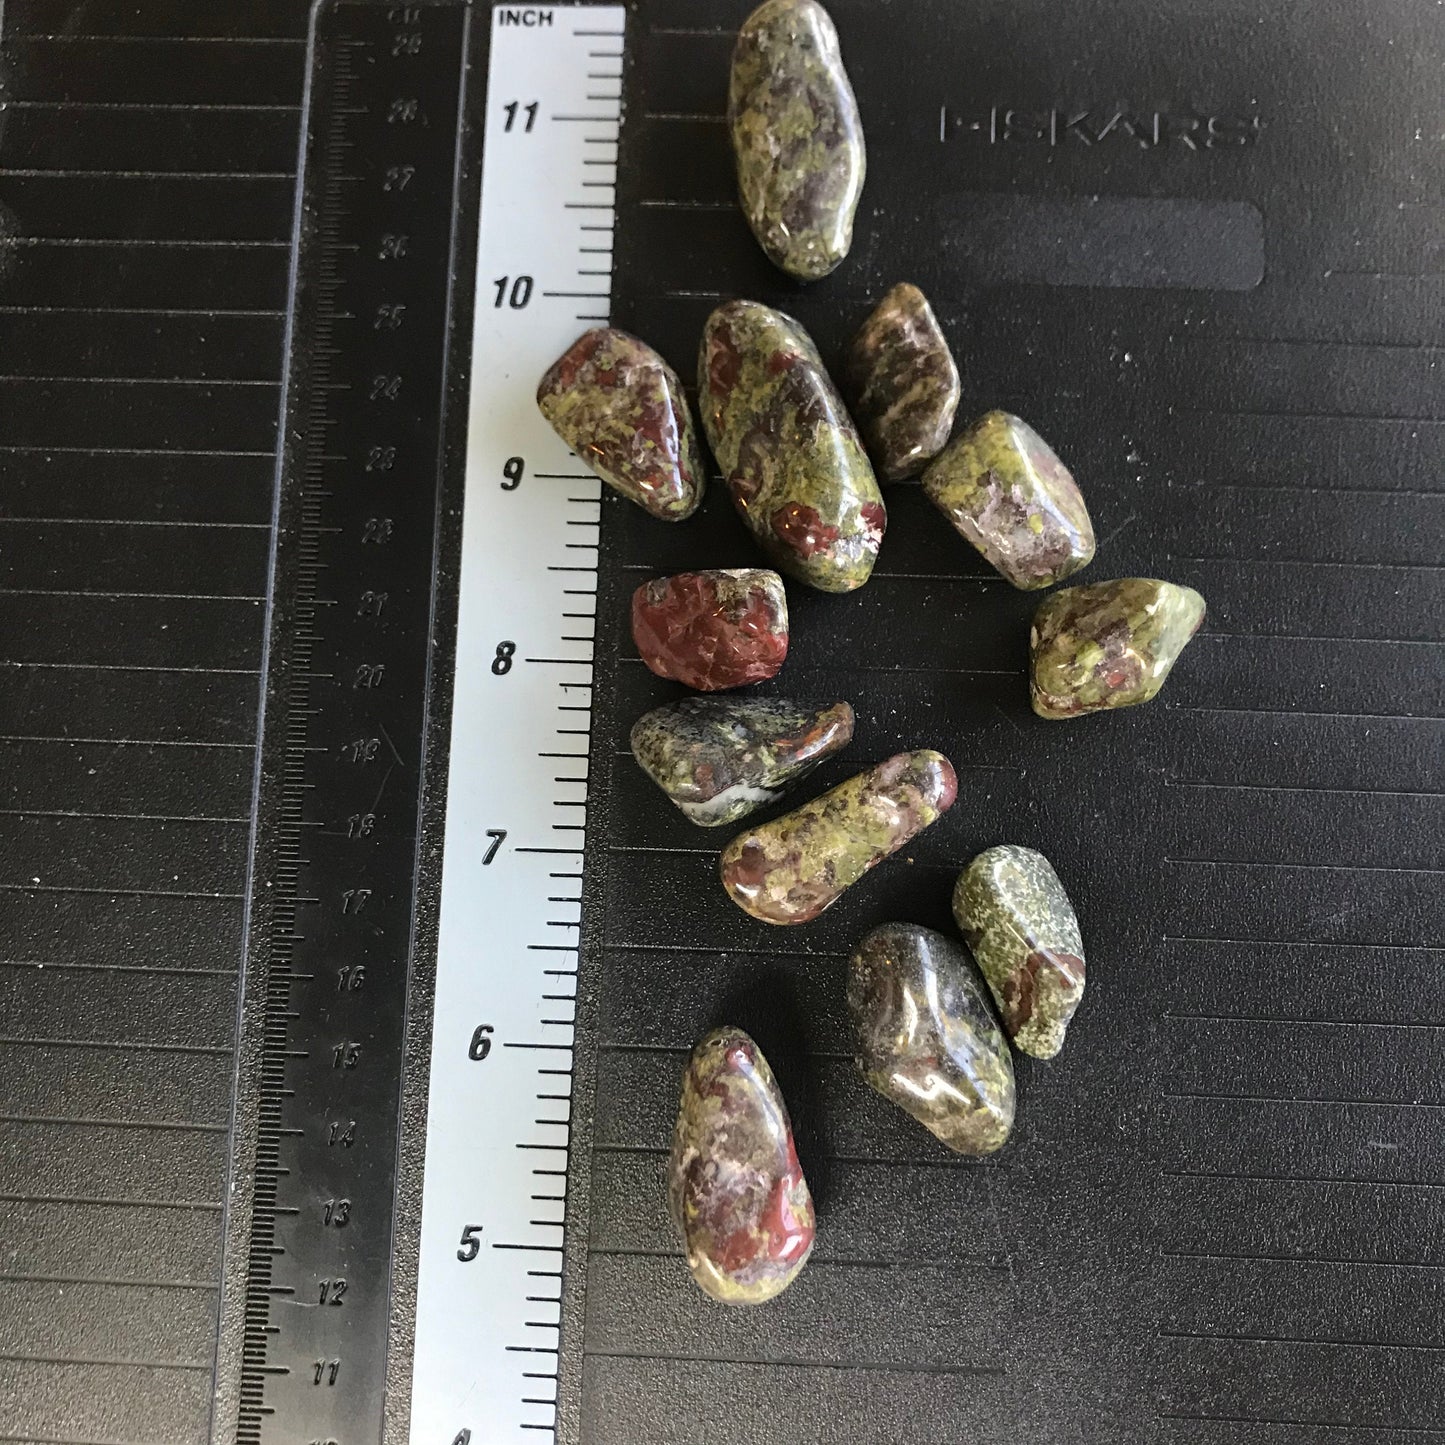 Dragon's Blood Jasper Tumbled Stone (Approx. 3/4" - 1 1/4") BIN-1285 Polished Stone, for Wire Wrapping or Crystal Grid Supply